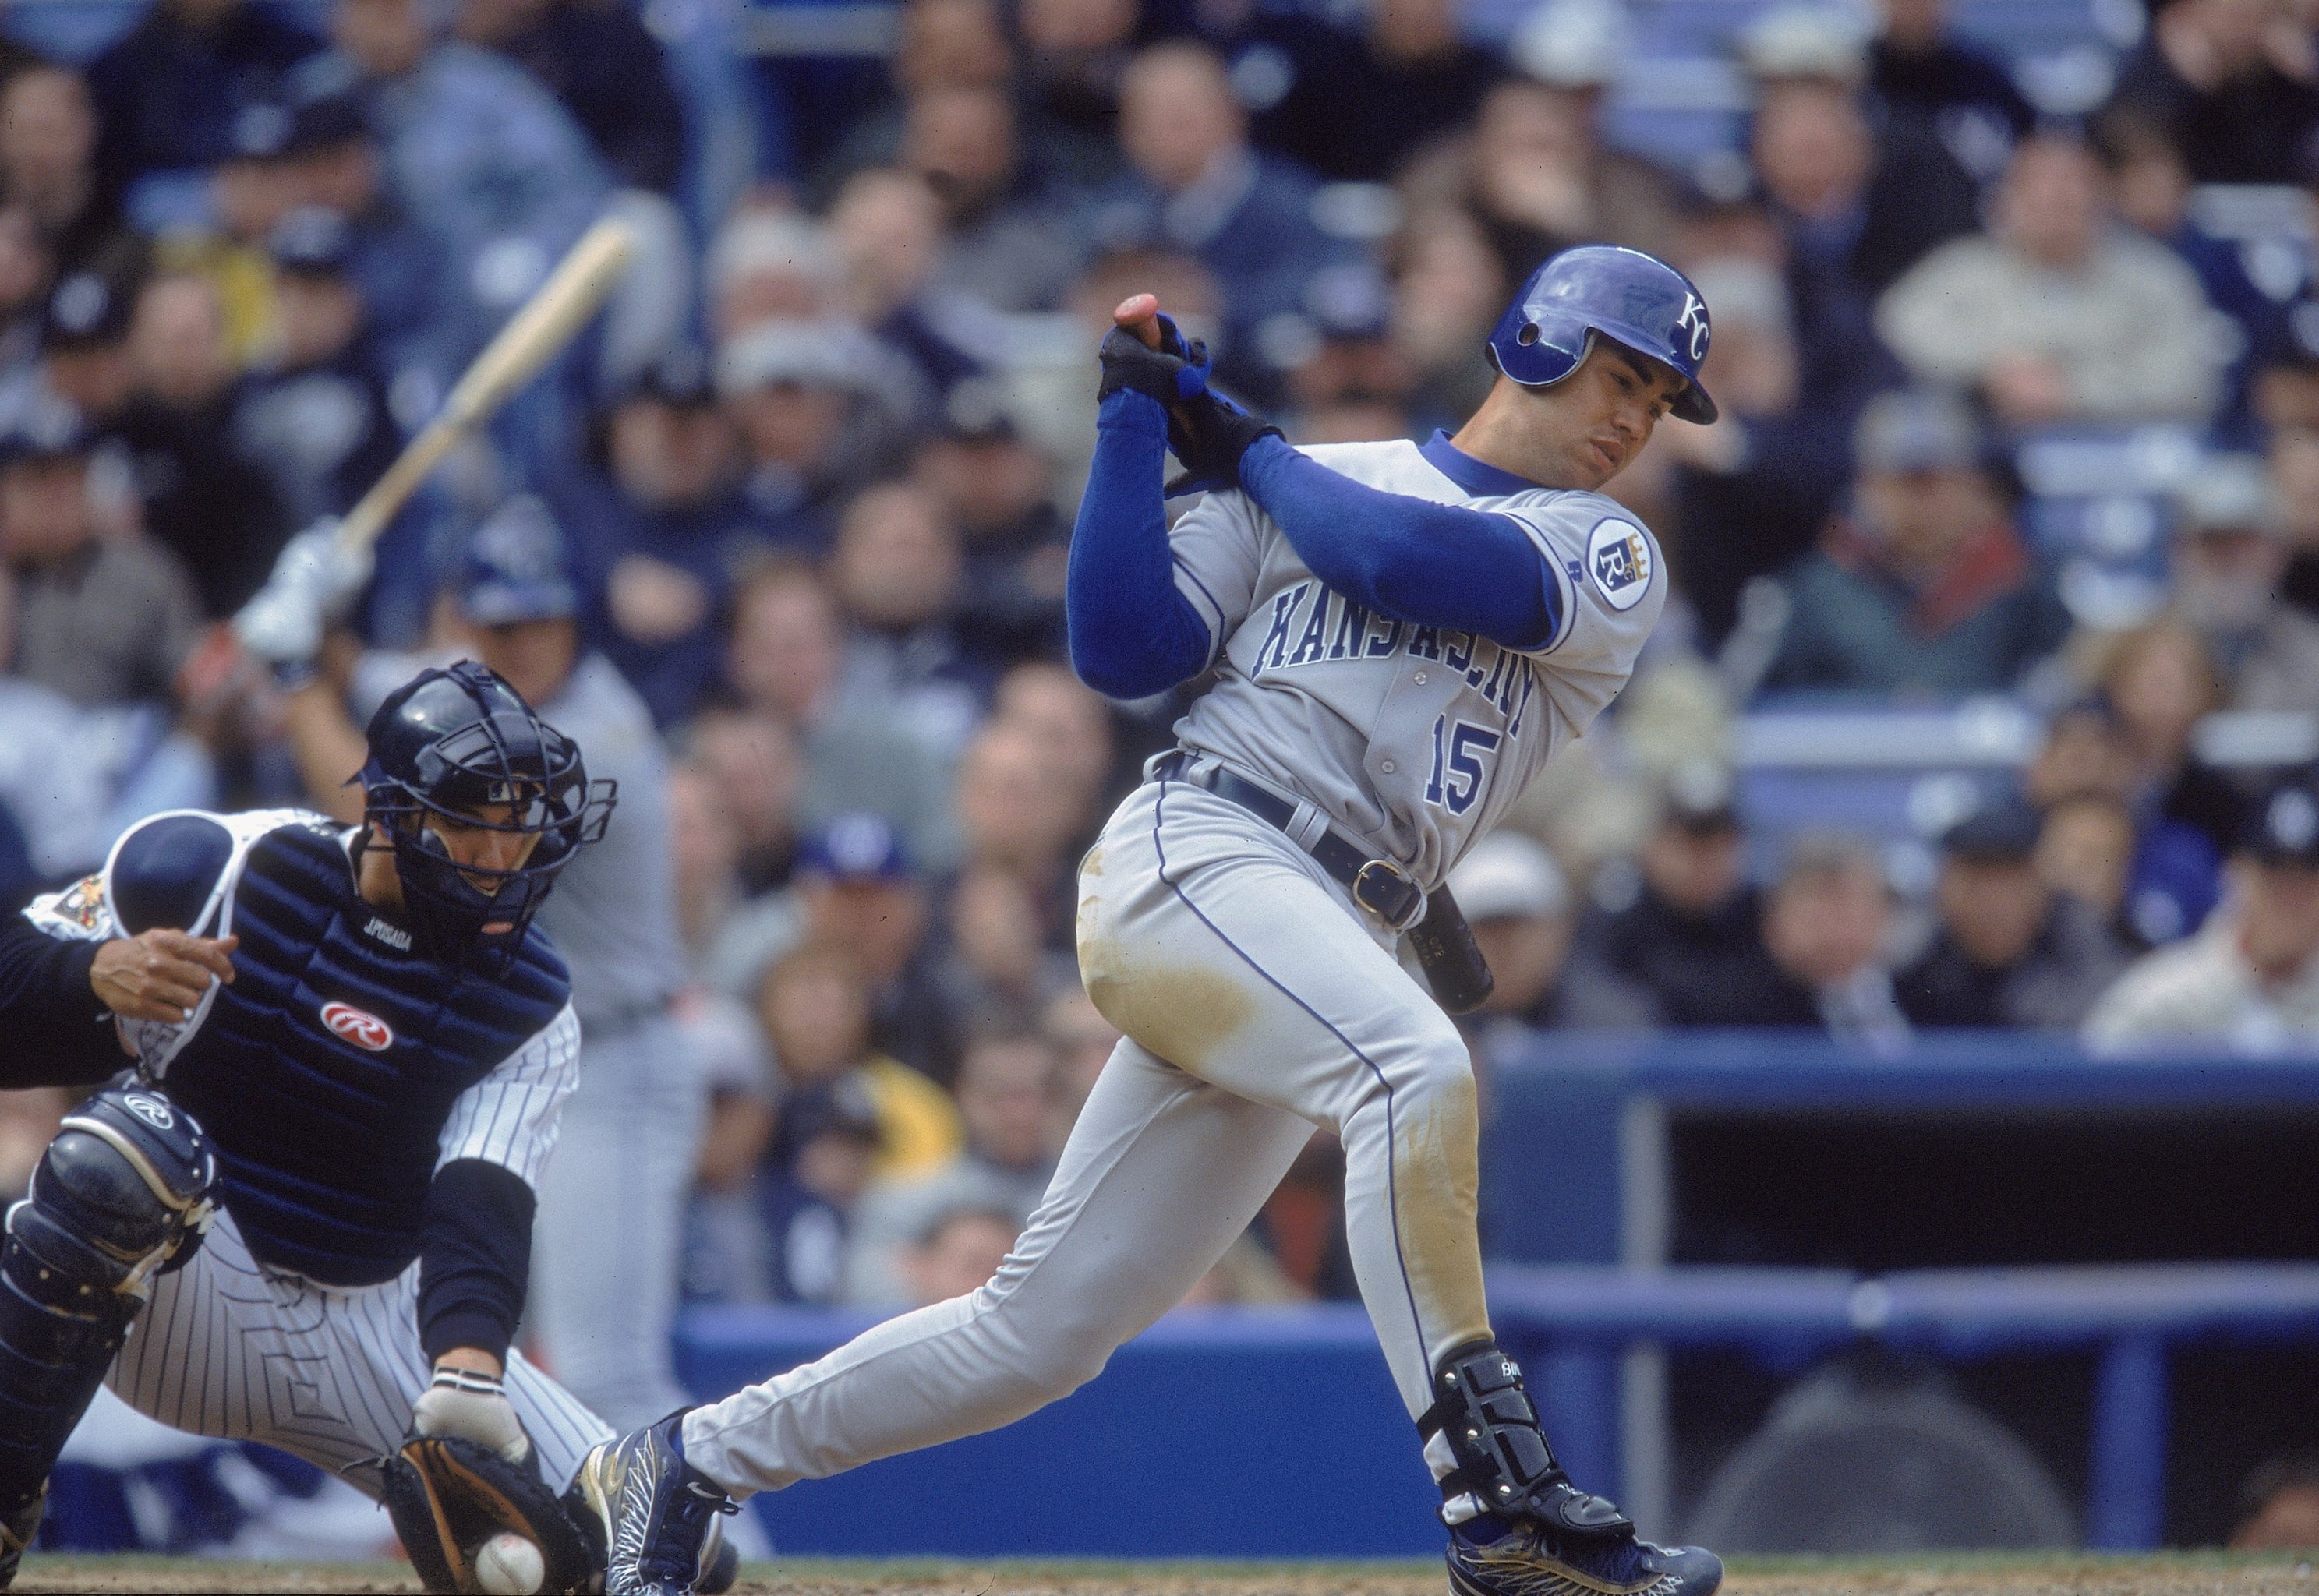 John Olerud was a Seriously Underrated Baseball Player : r/NewYorkMets